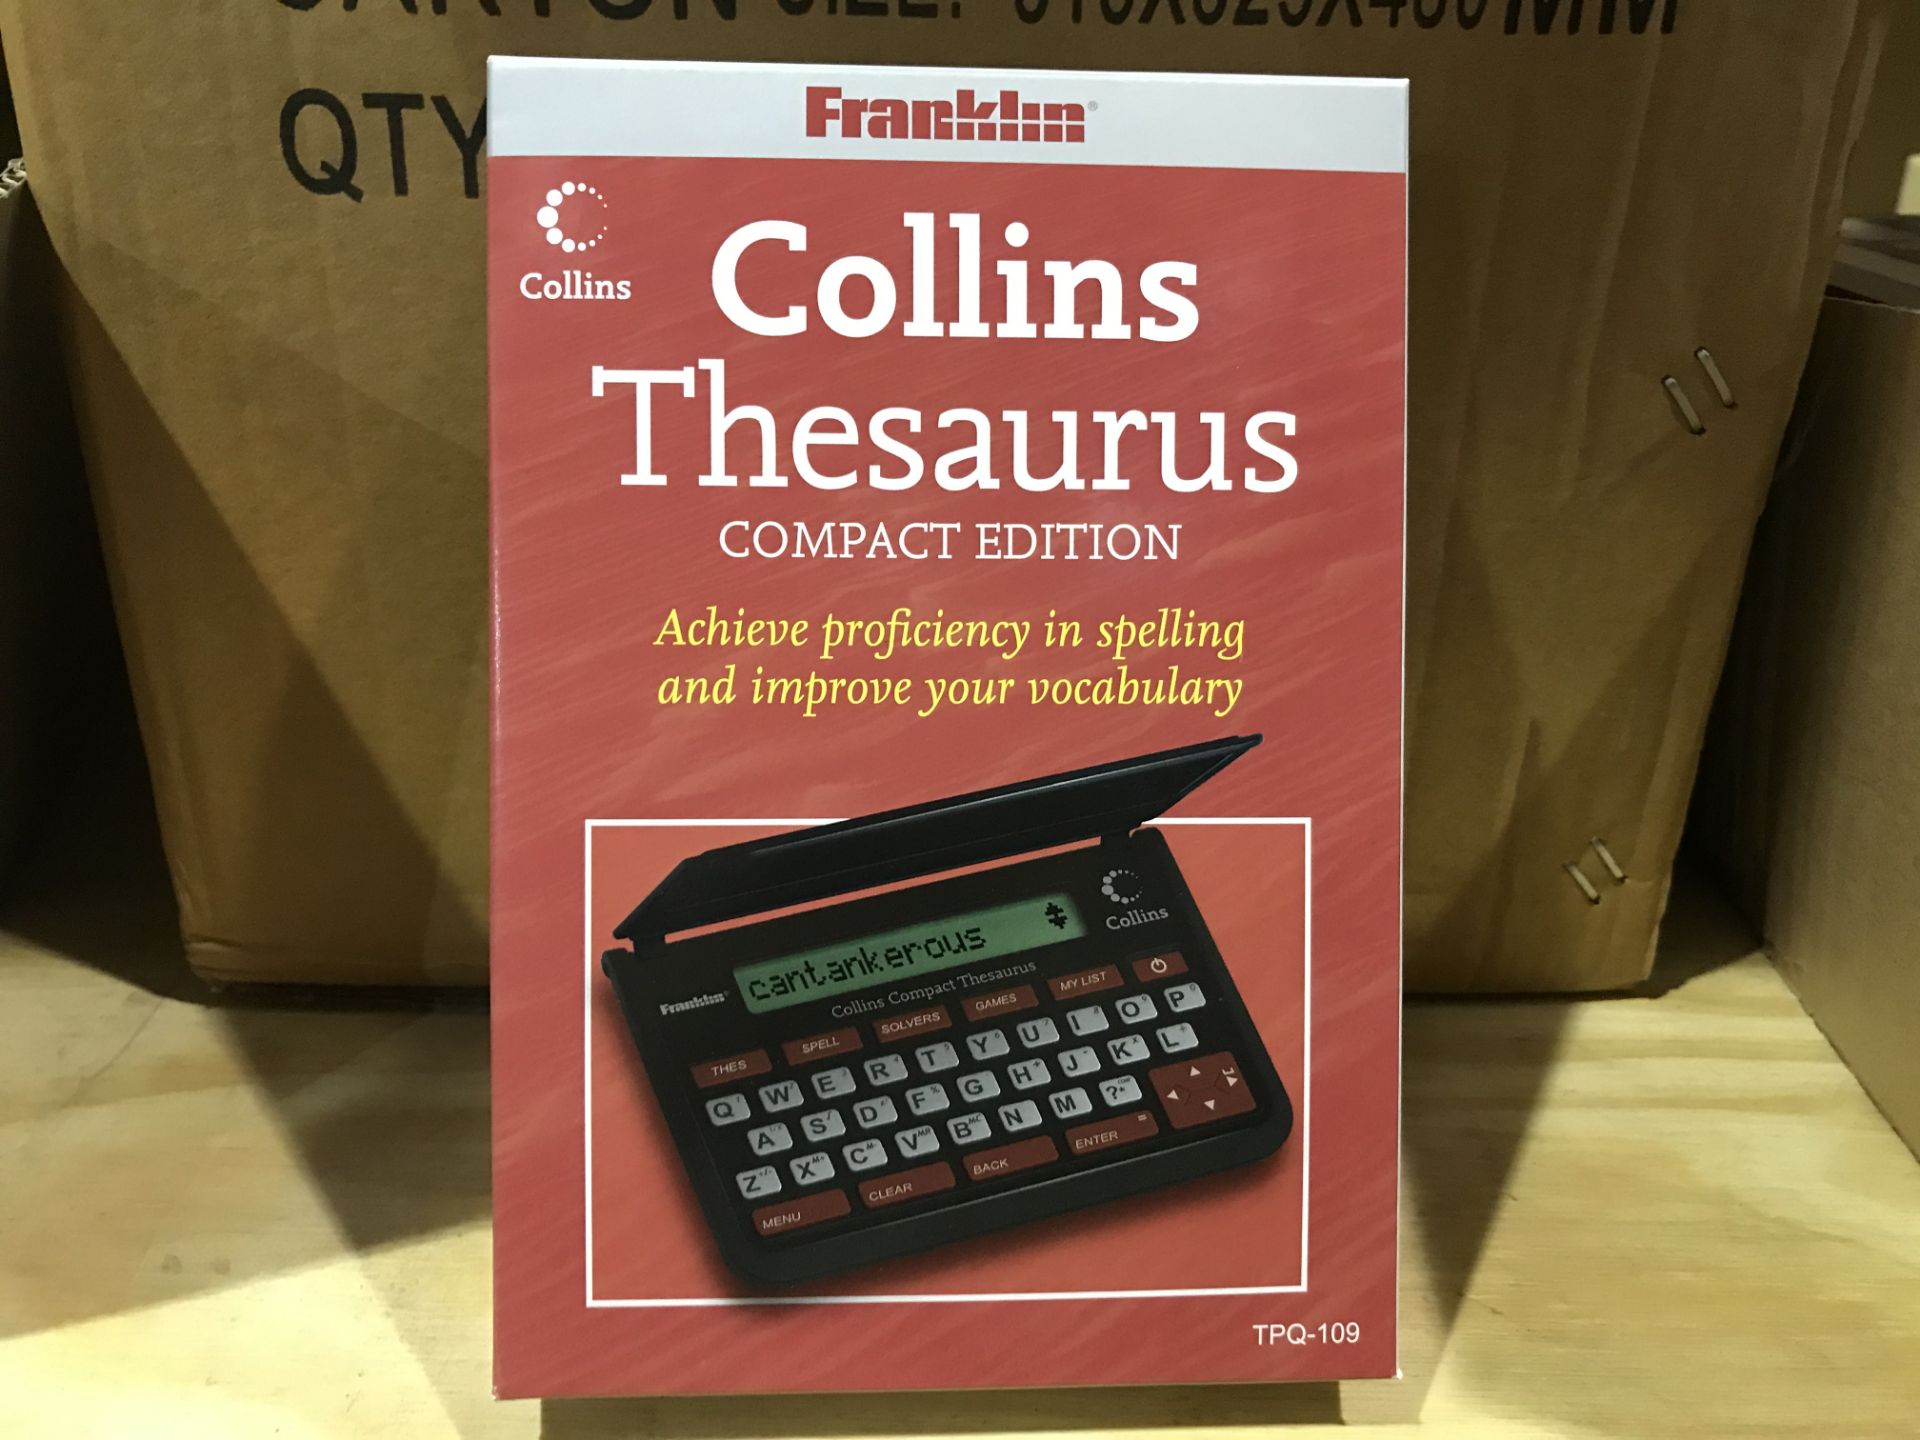 10 X FRANKLIN COLLINS THESAURUS COMPACT EDITION